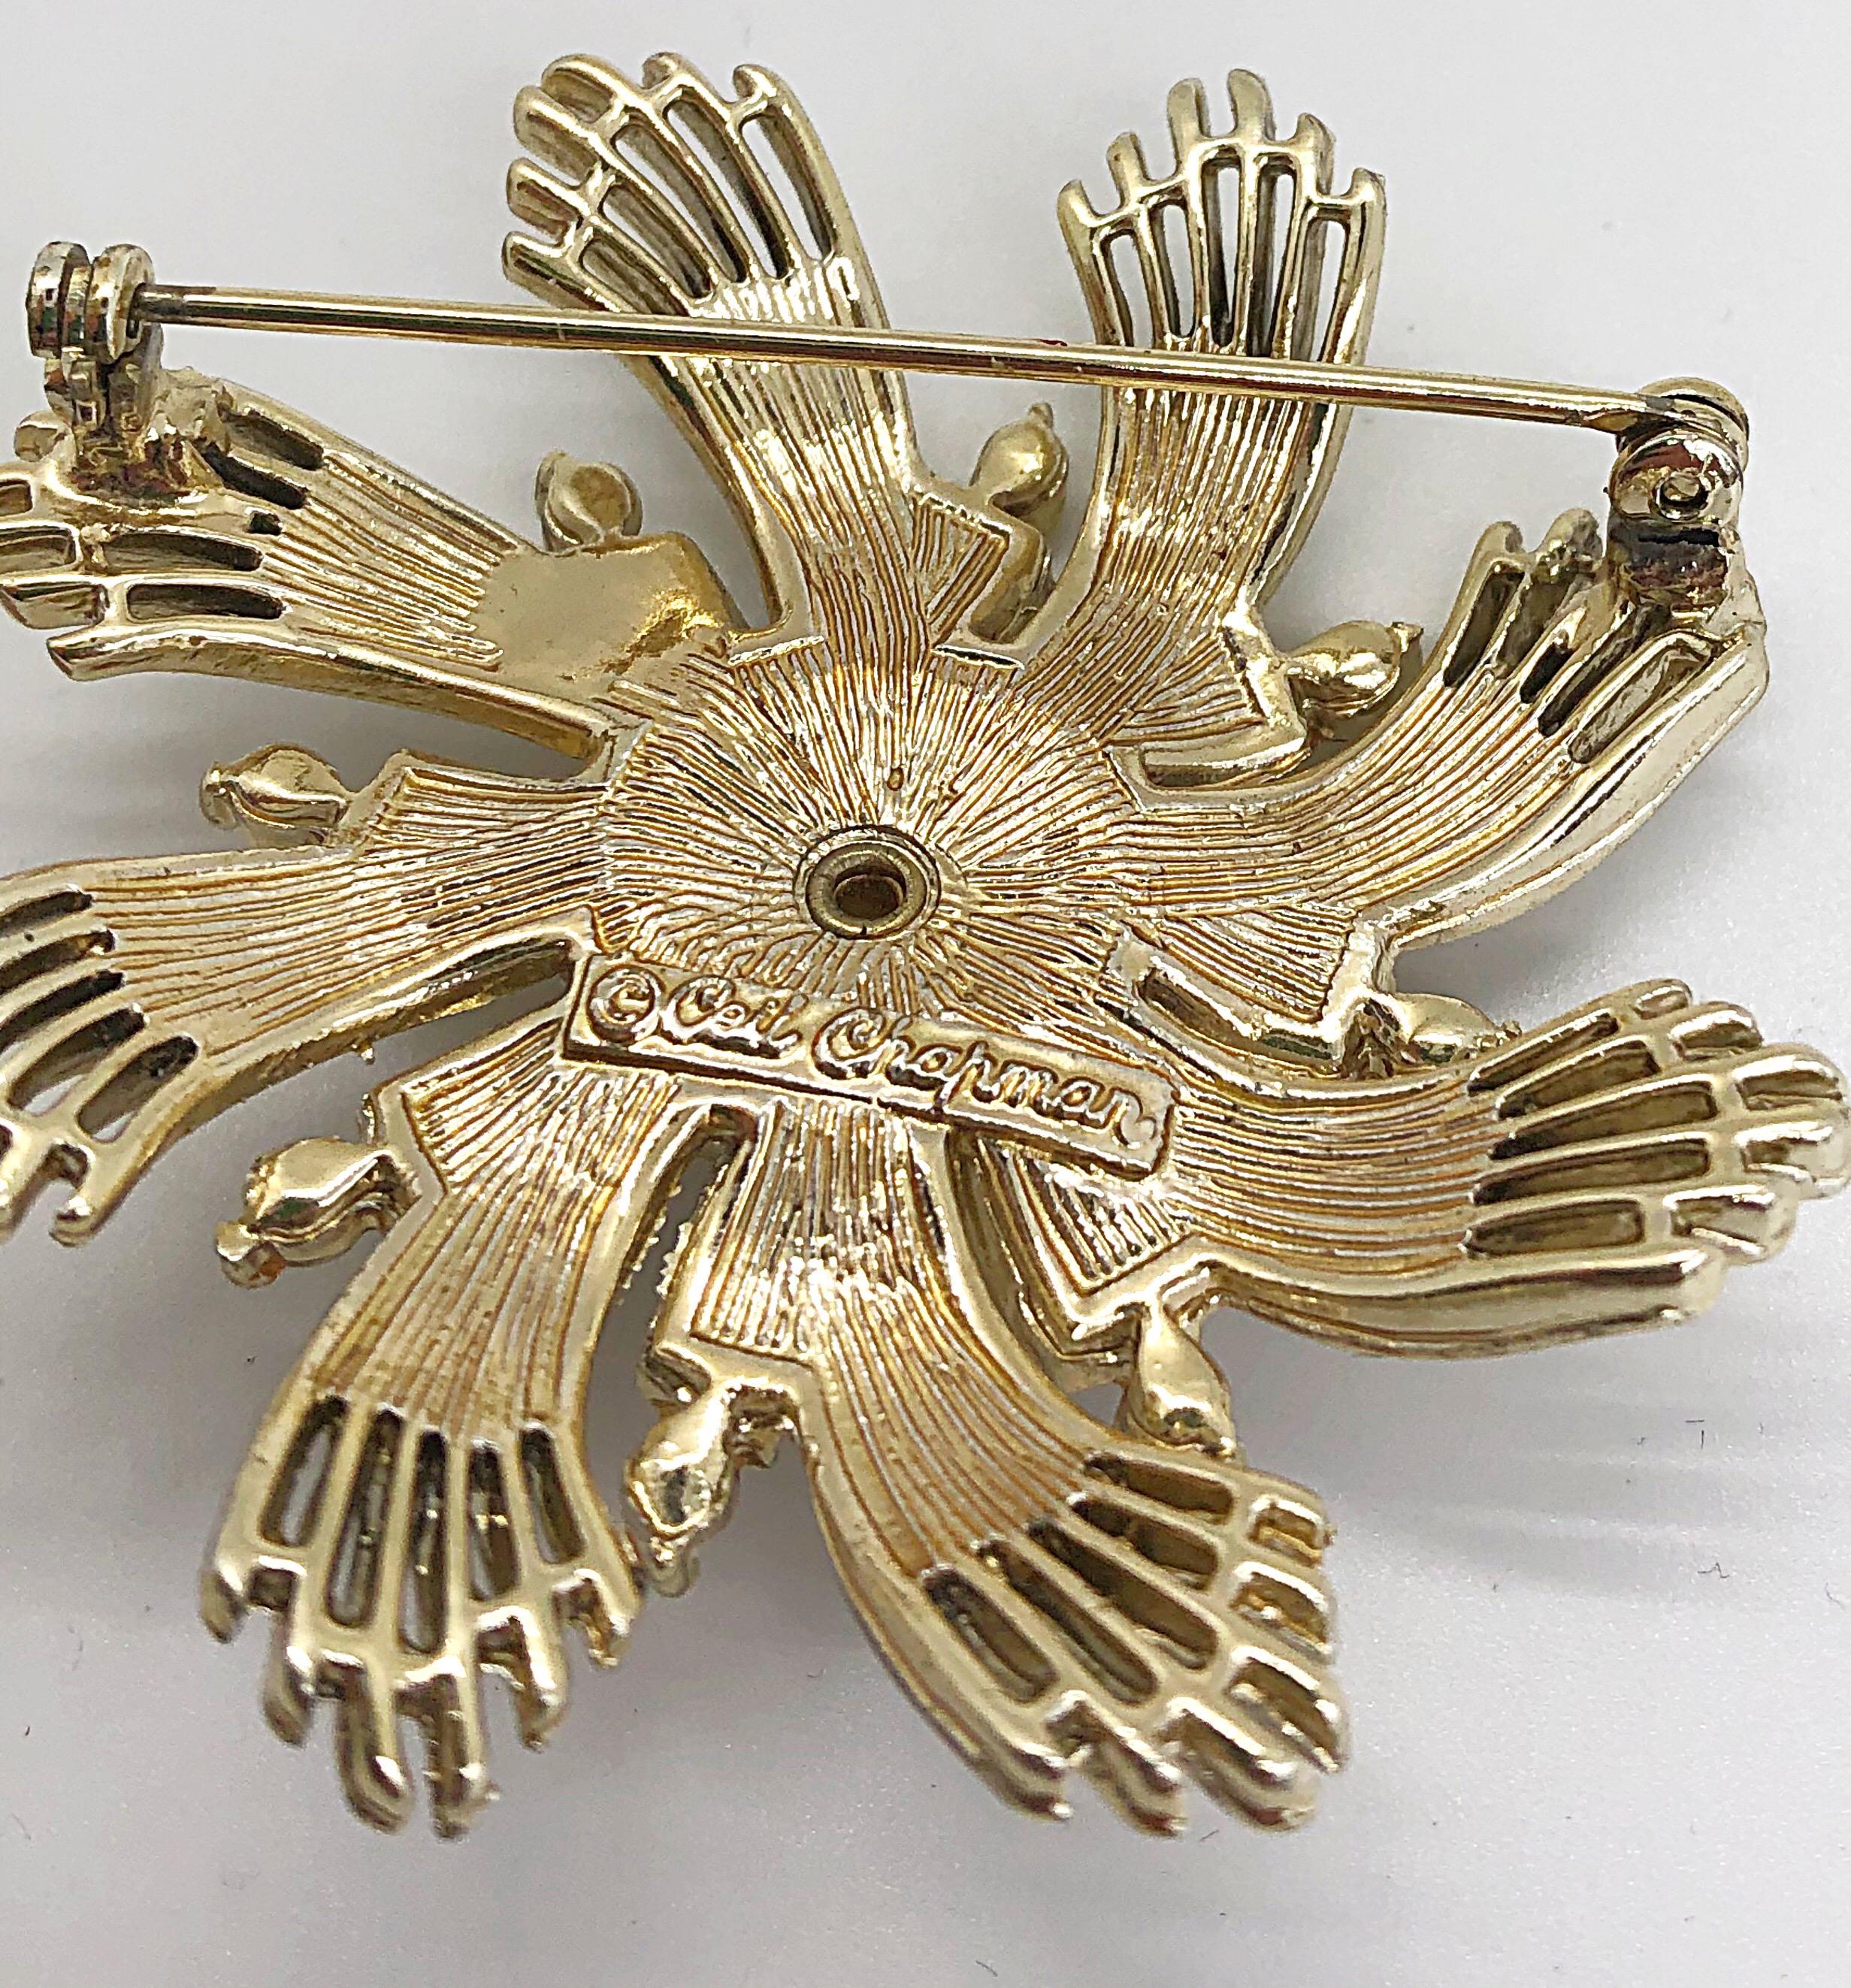 Rare 1950s signed CEIL CHAPMAN light gold, pearl and rhinestone large brooch pin ! Features a light gold encrusted with a large center pearl, and rhinestones throughout. Really adds that extra something to any outfit. Can easily be dressed up or